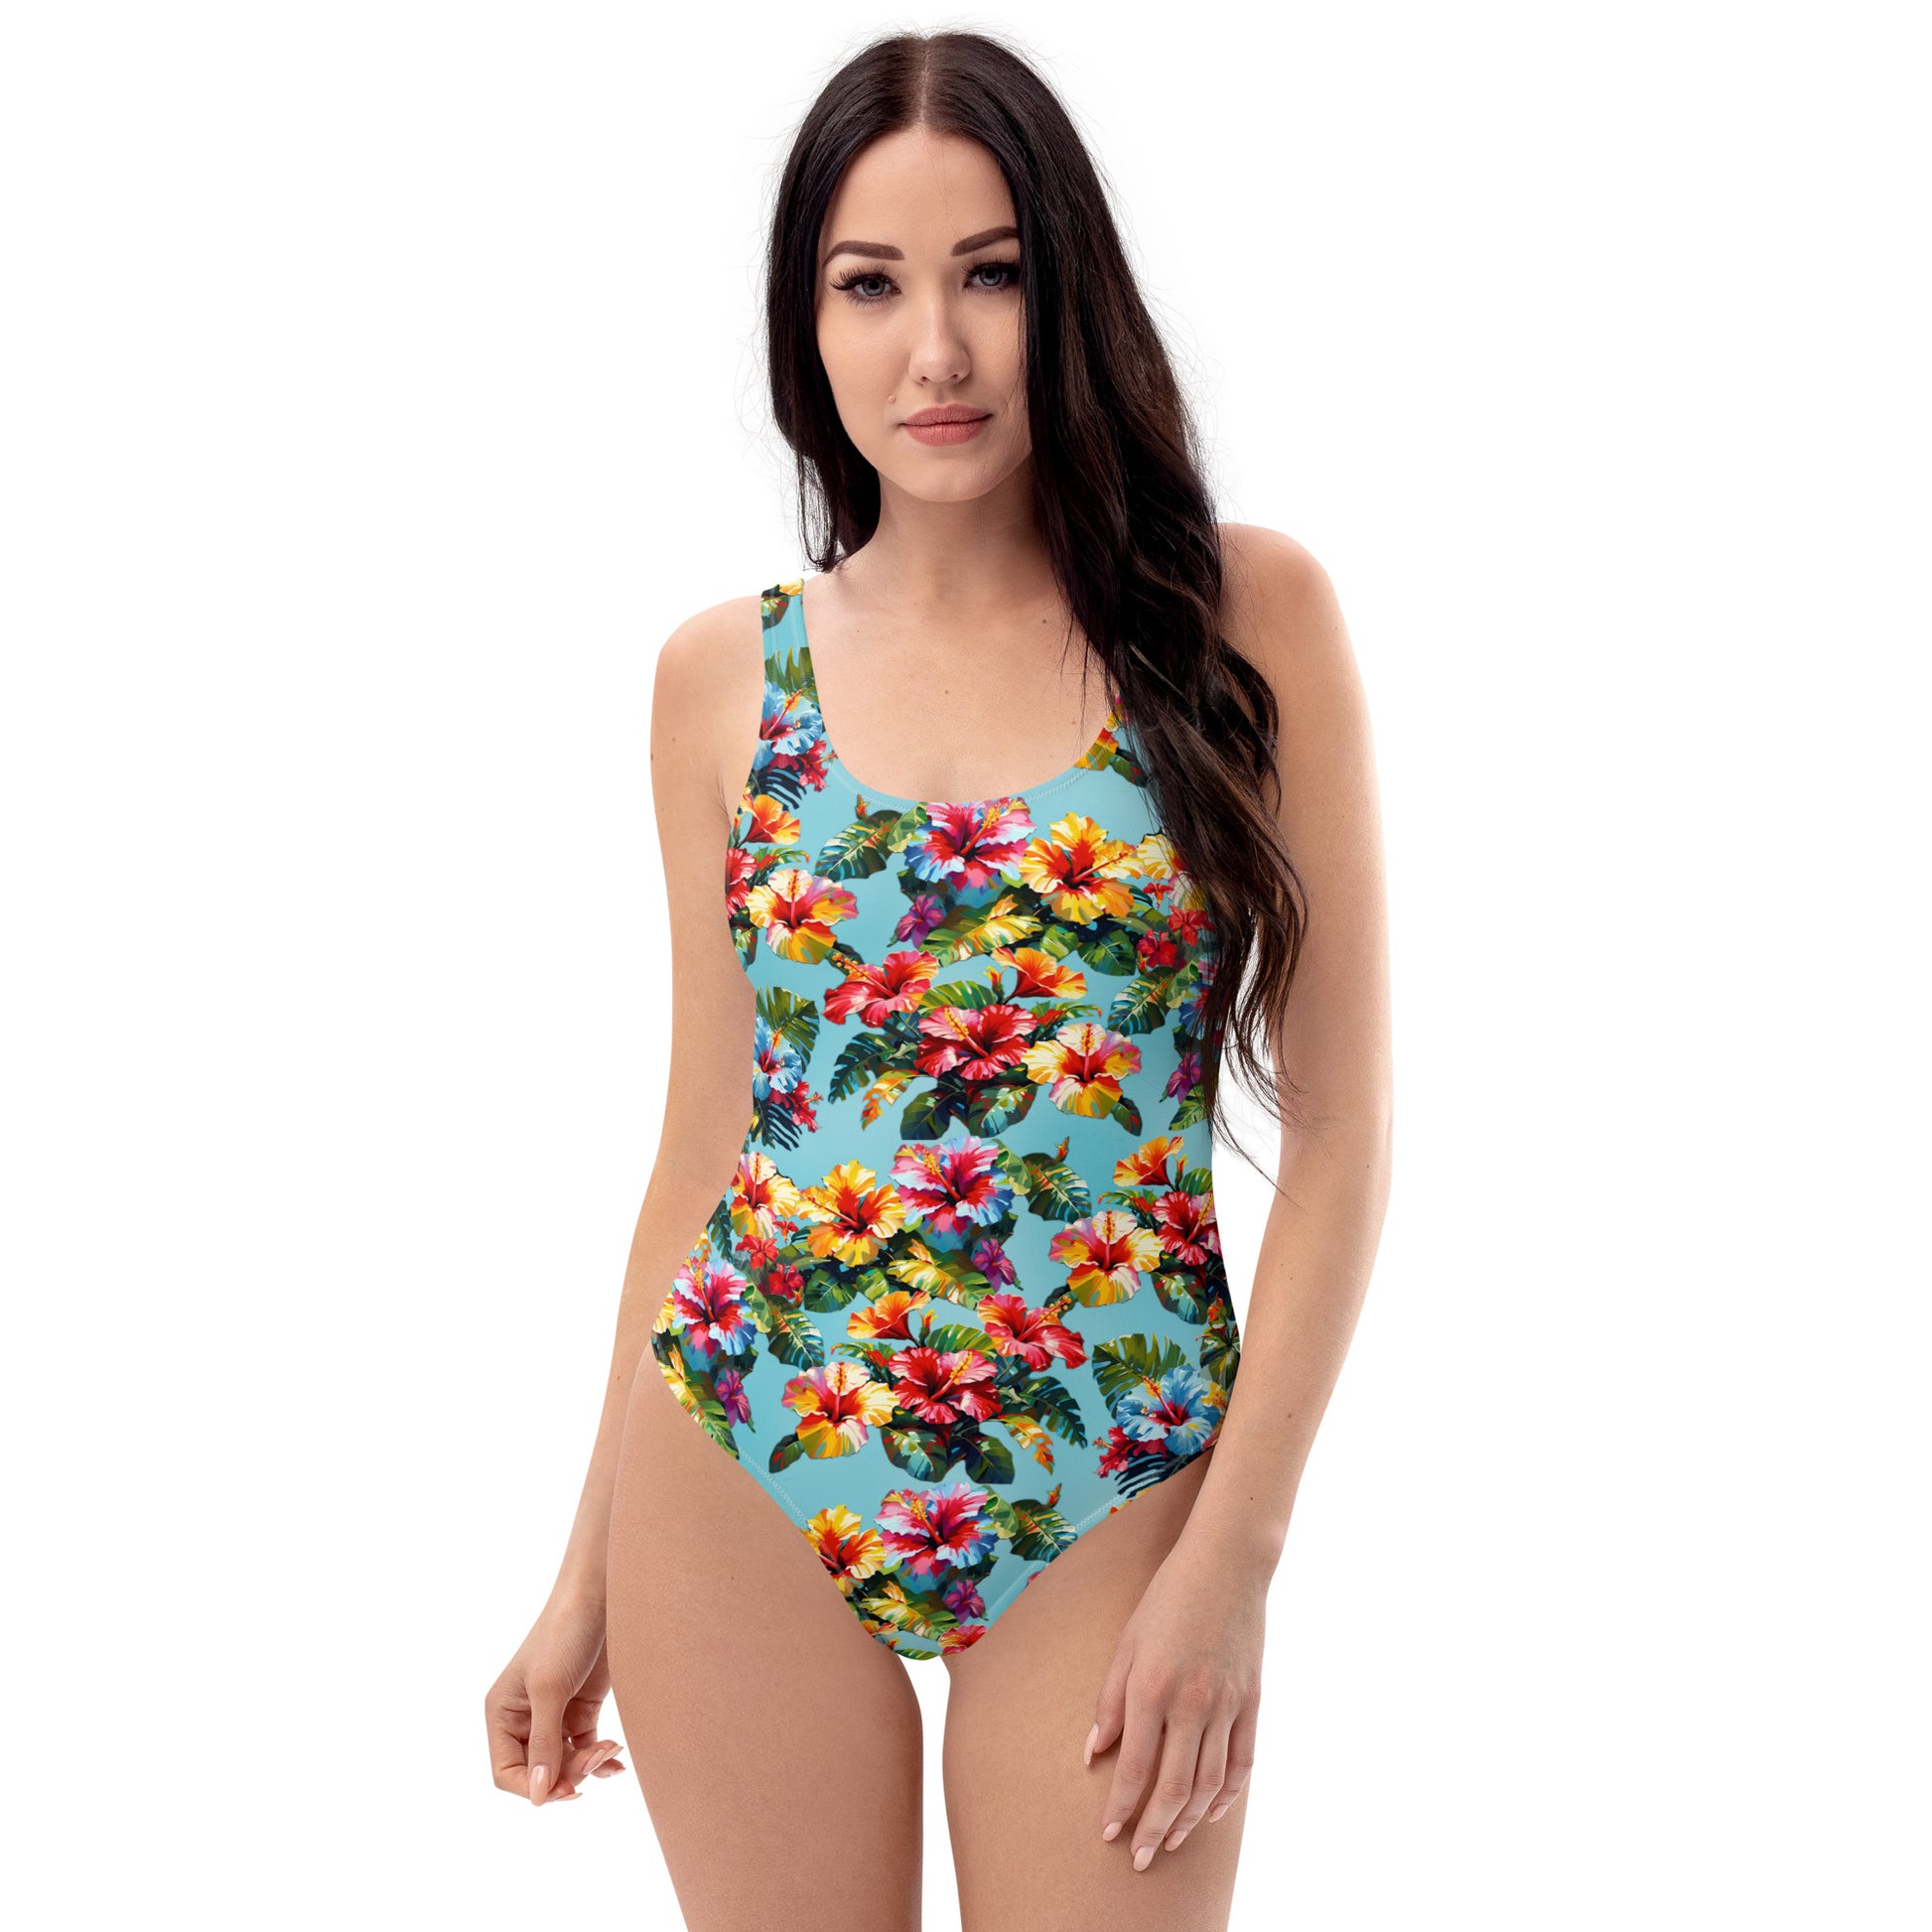 A picture of a woman modeling a Hawaiian Hibiscus Flower patterned One-Piece Swimsuit - front